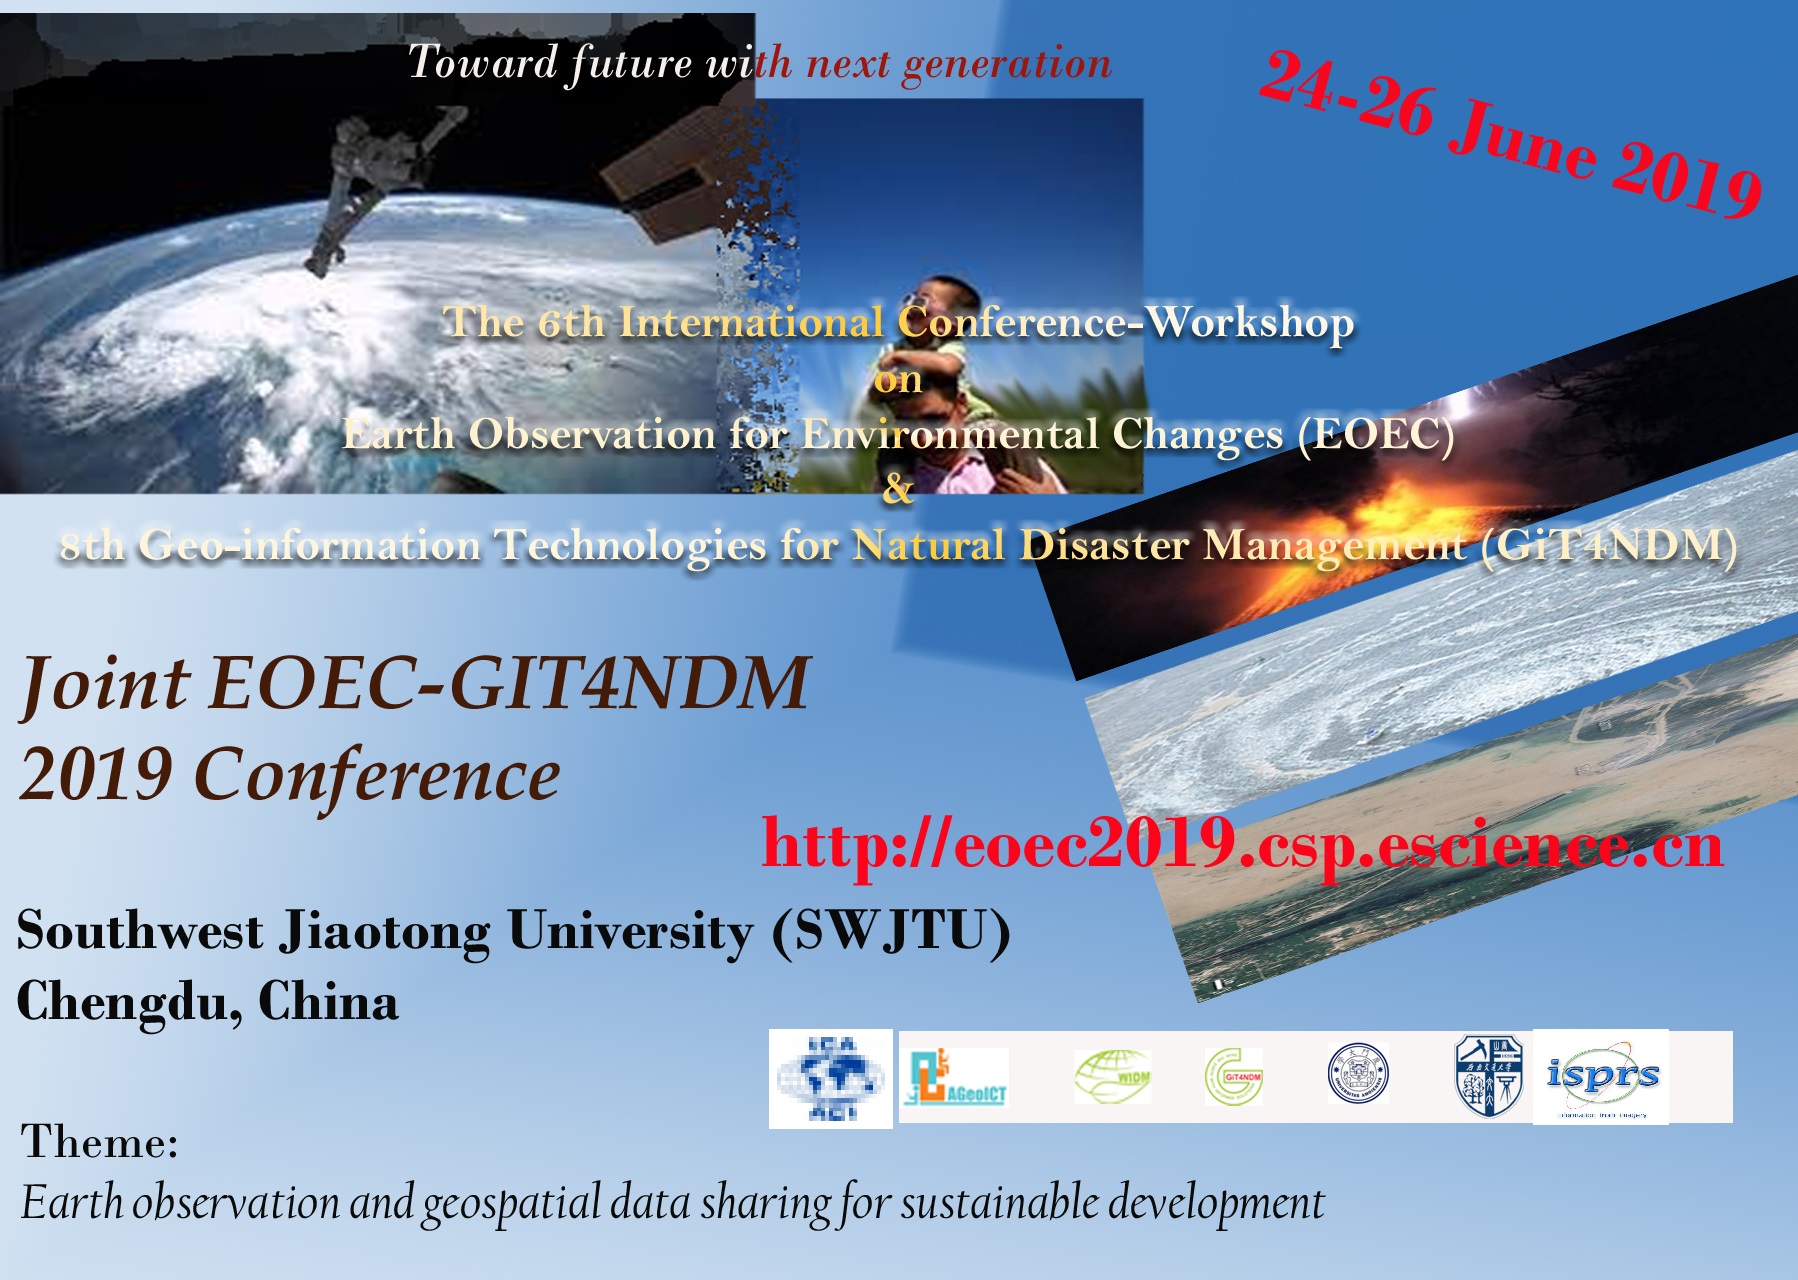 Updated information and Invitation: 6th Conference for Earth Observation and Environmental Changes (EOEC) and the 8th Conference on Geoinformati...